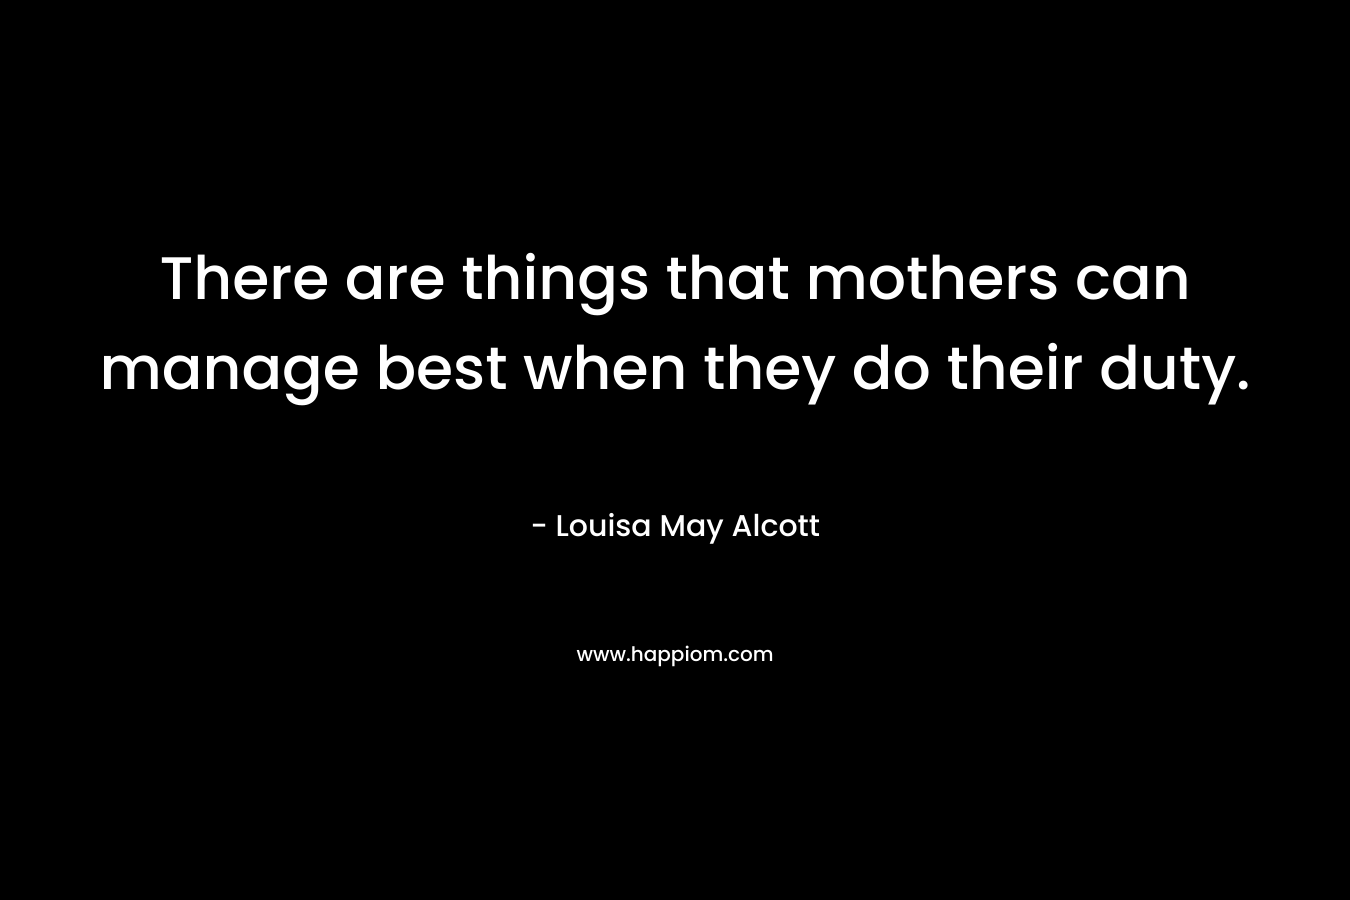 There are things that mothers can manage best when they do their duty. – Louisa May Alcott